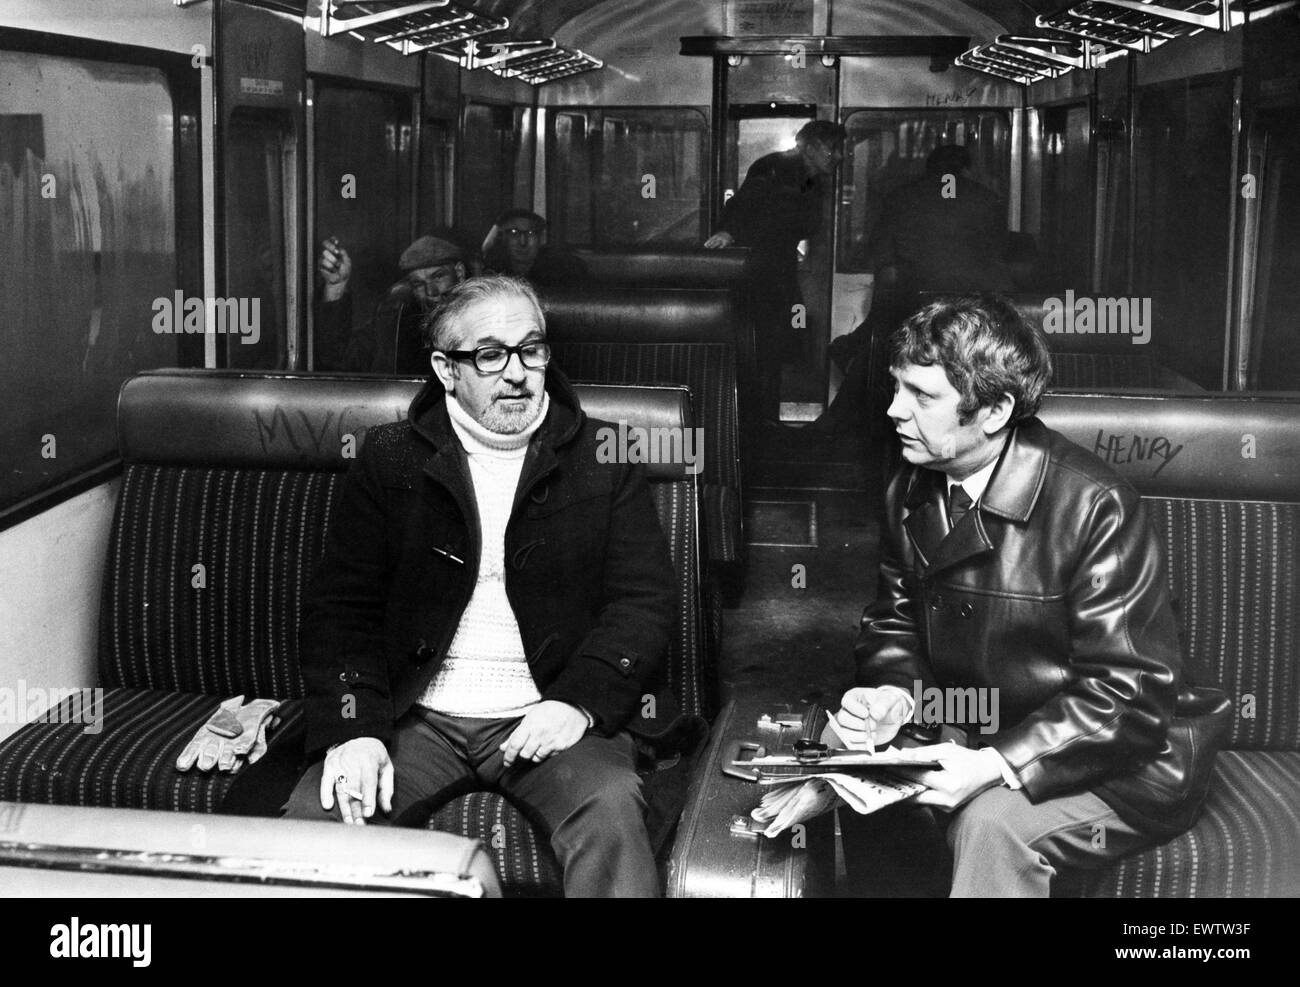 British railway detectives interview passenger on the 4.45 from Rhymney as the train approaches Caerphilly. They are trying to ascertain if anyone had been a passenger on the same train on the day school girl Paula Hughes was attacked, and had seen a yout Stock Photo